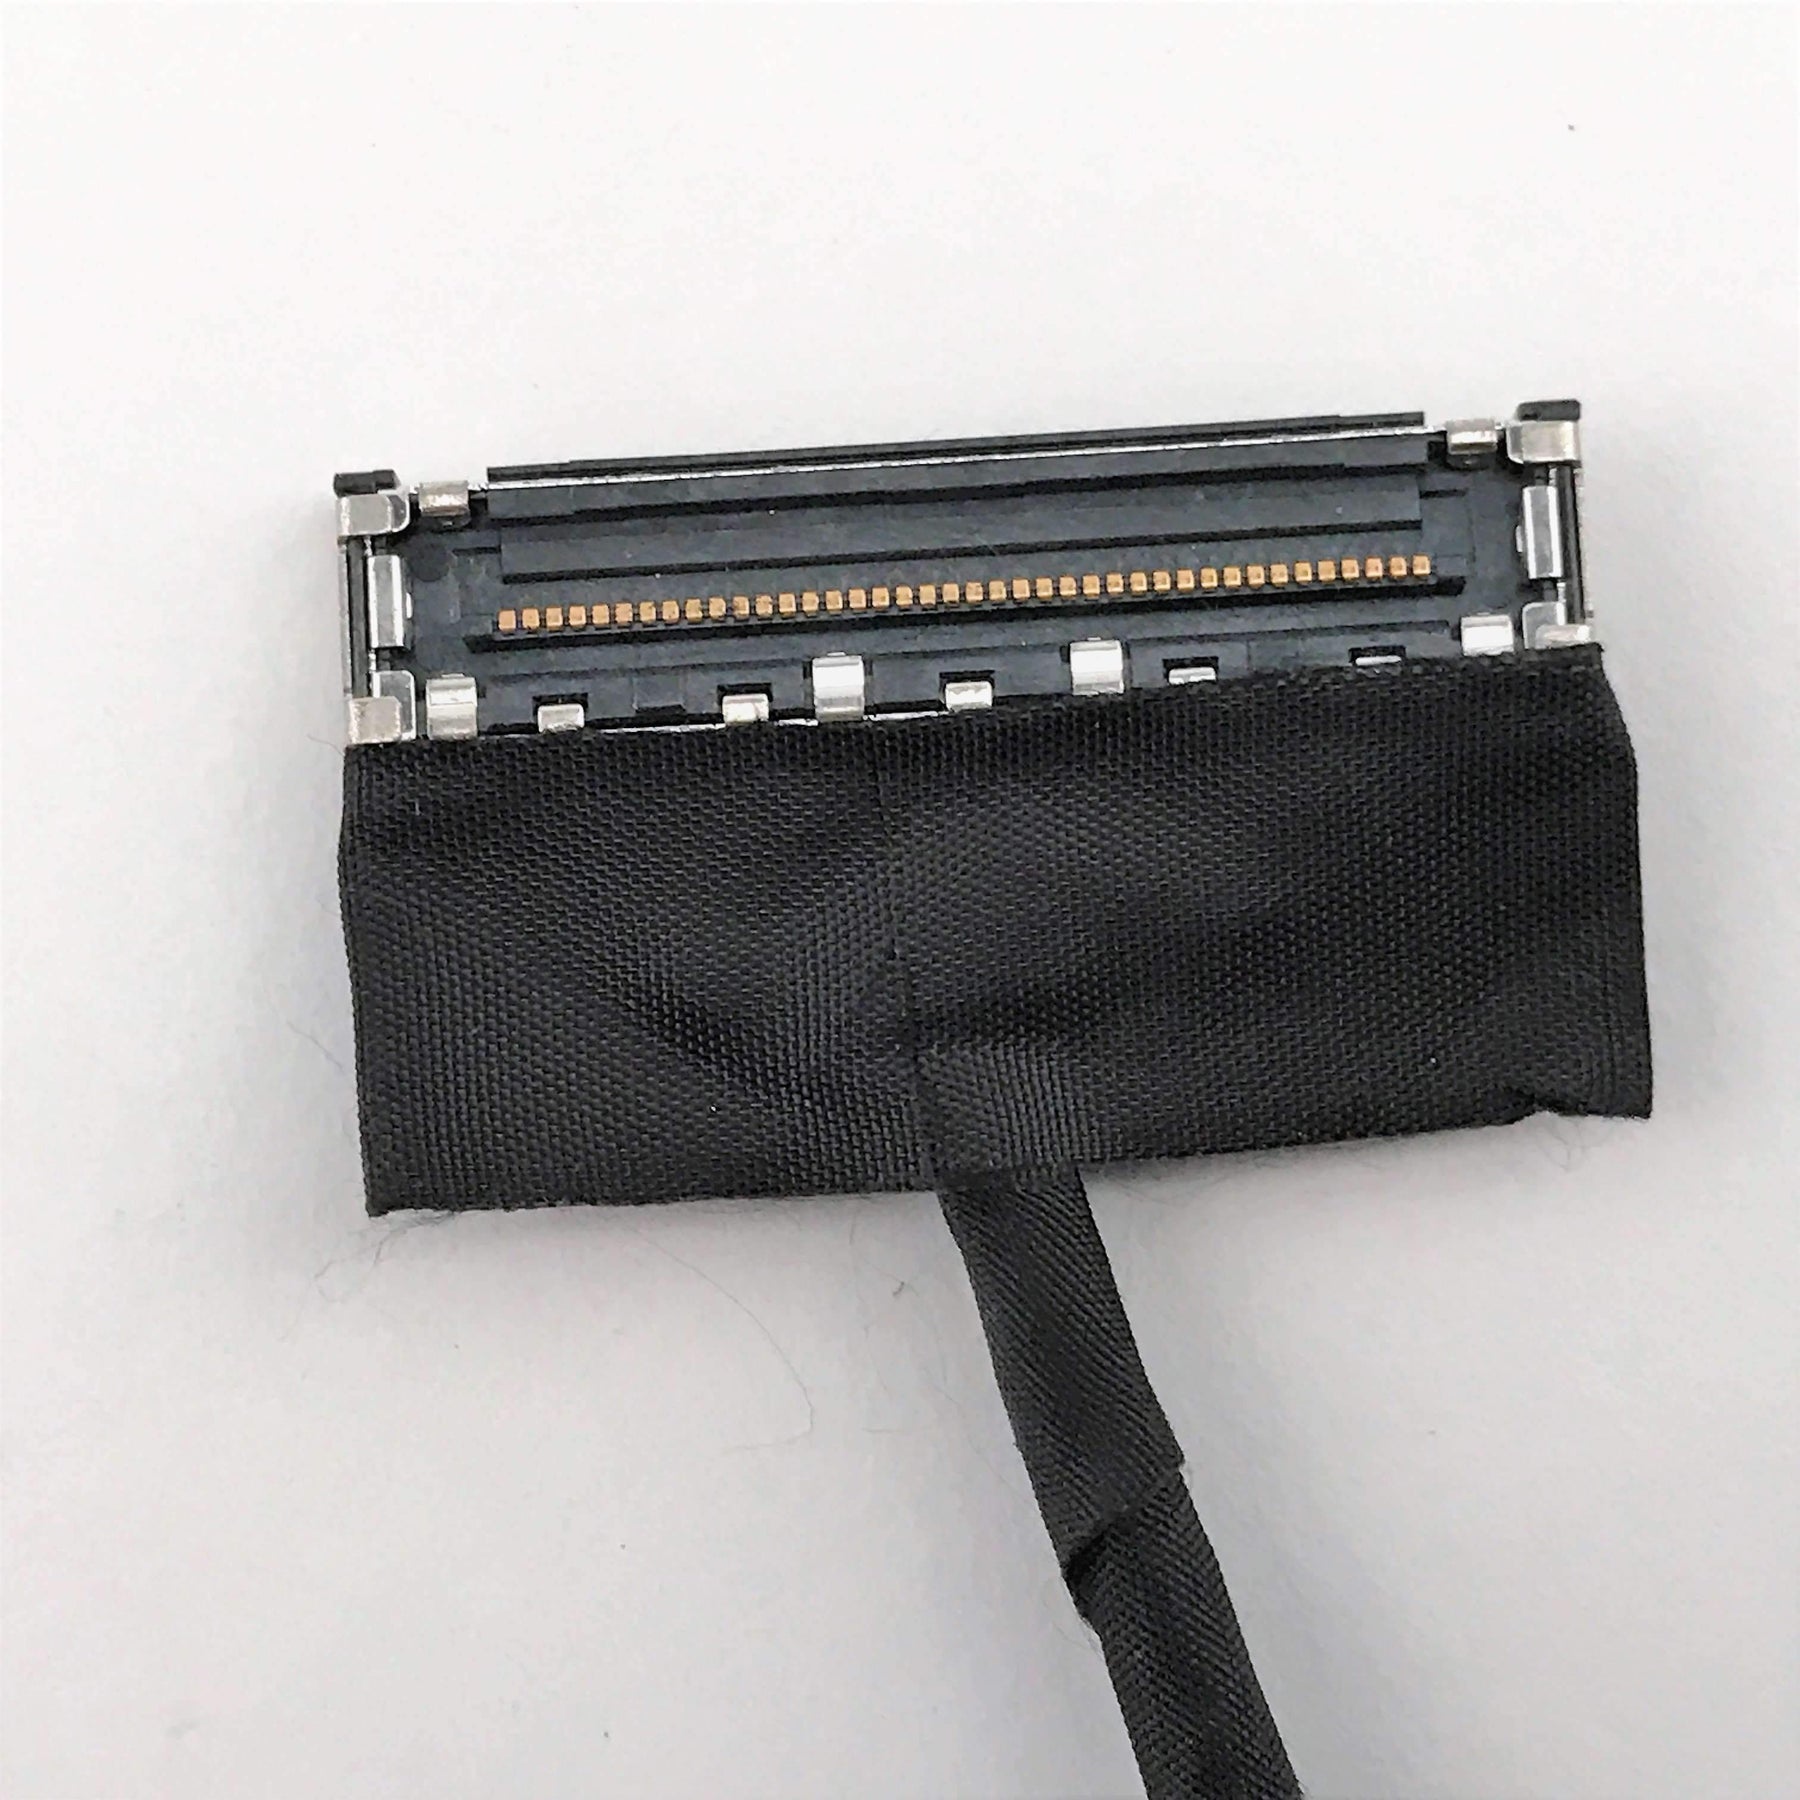 Renewed J5 LCD Cable